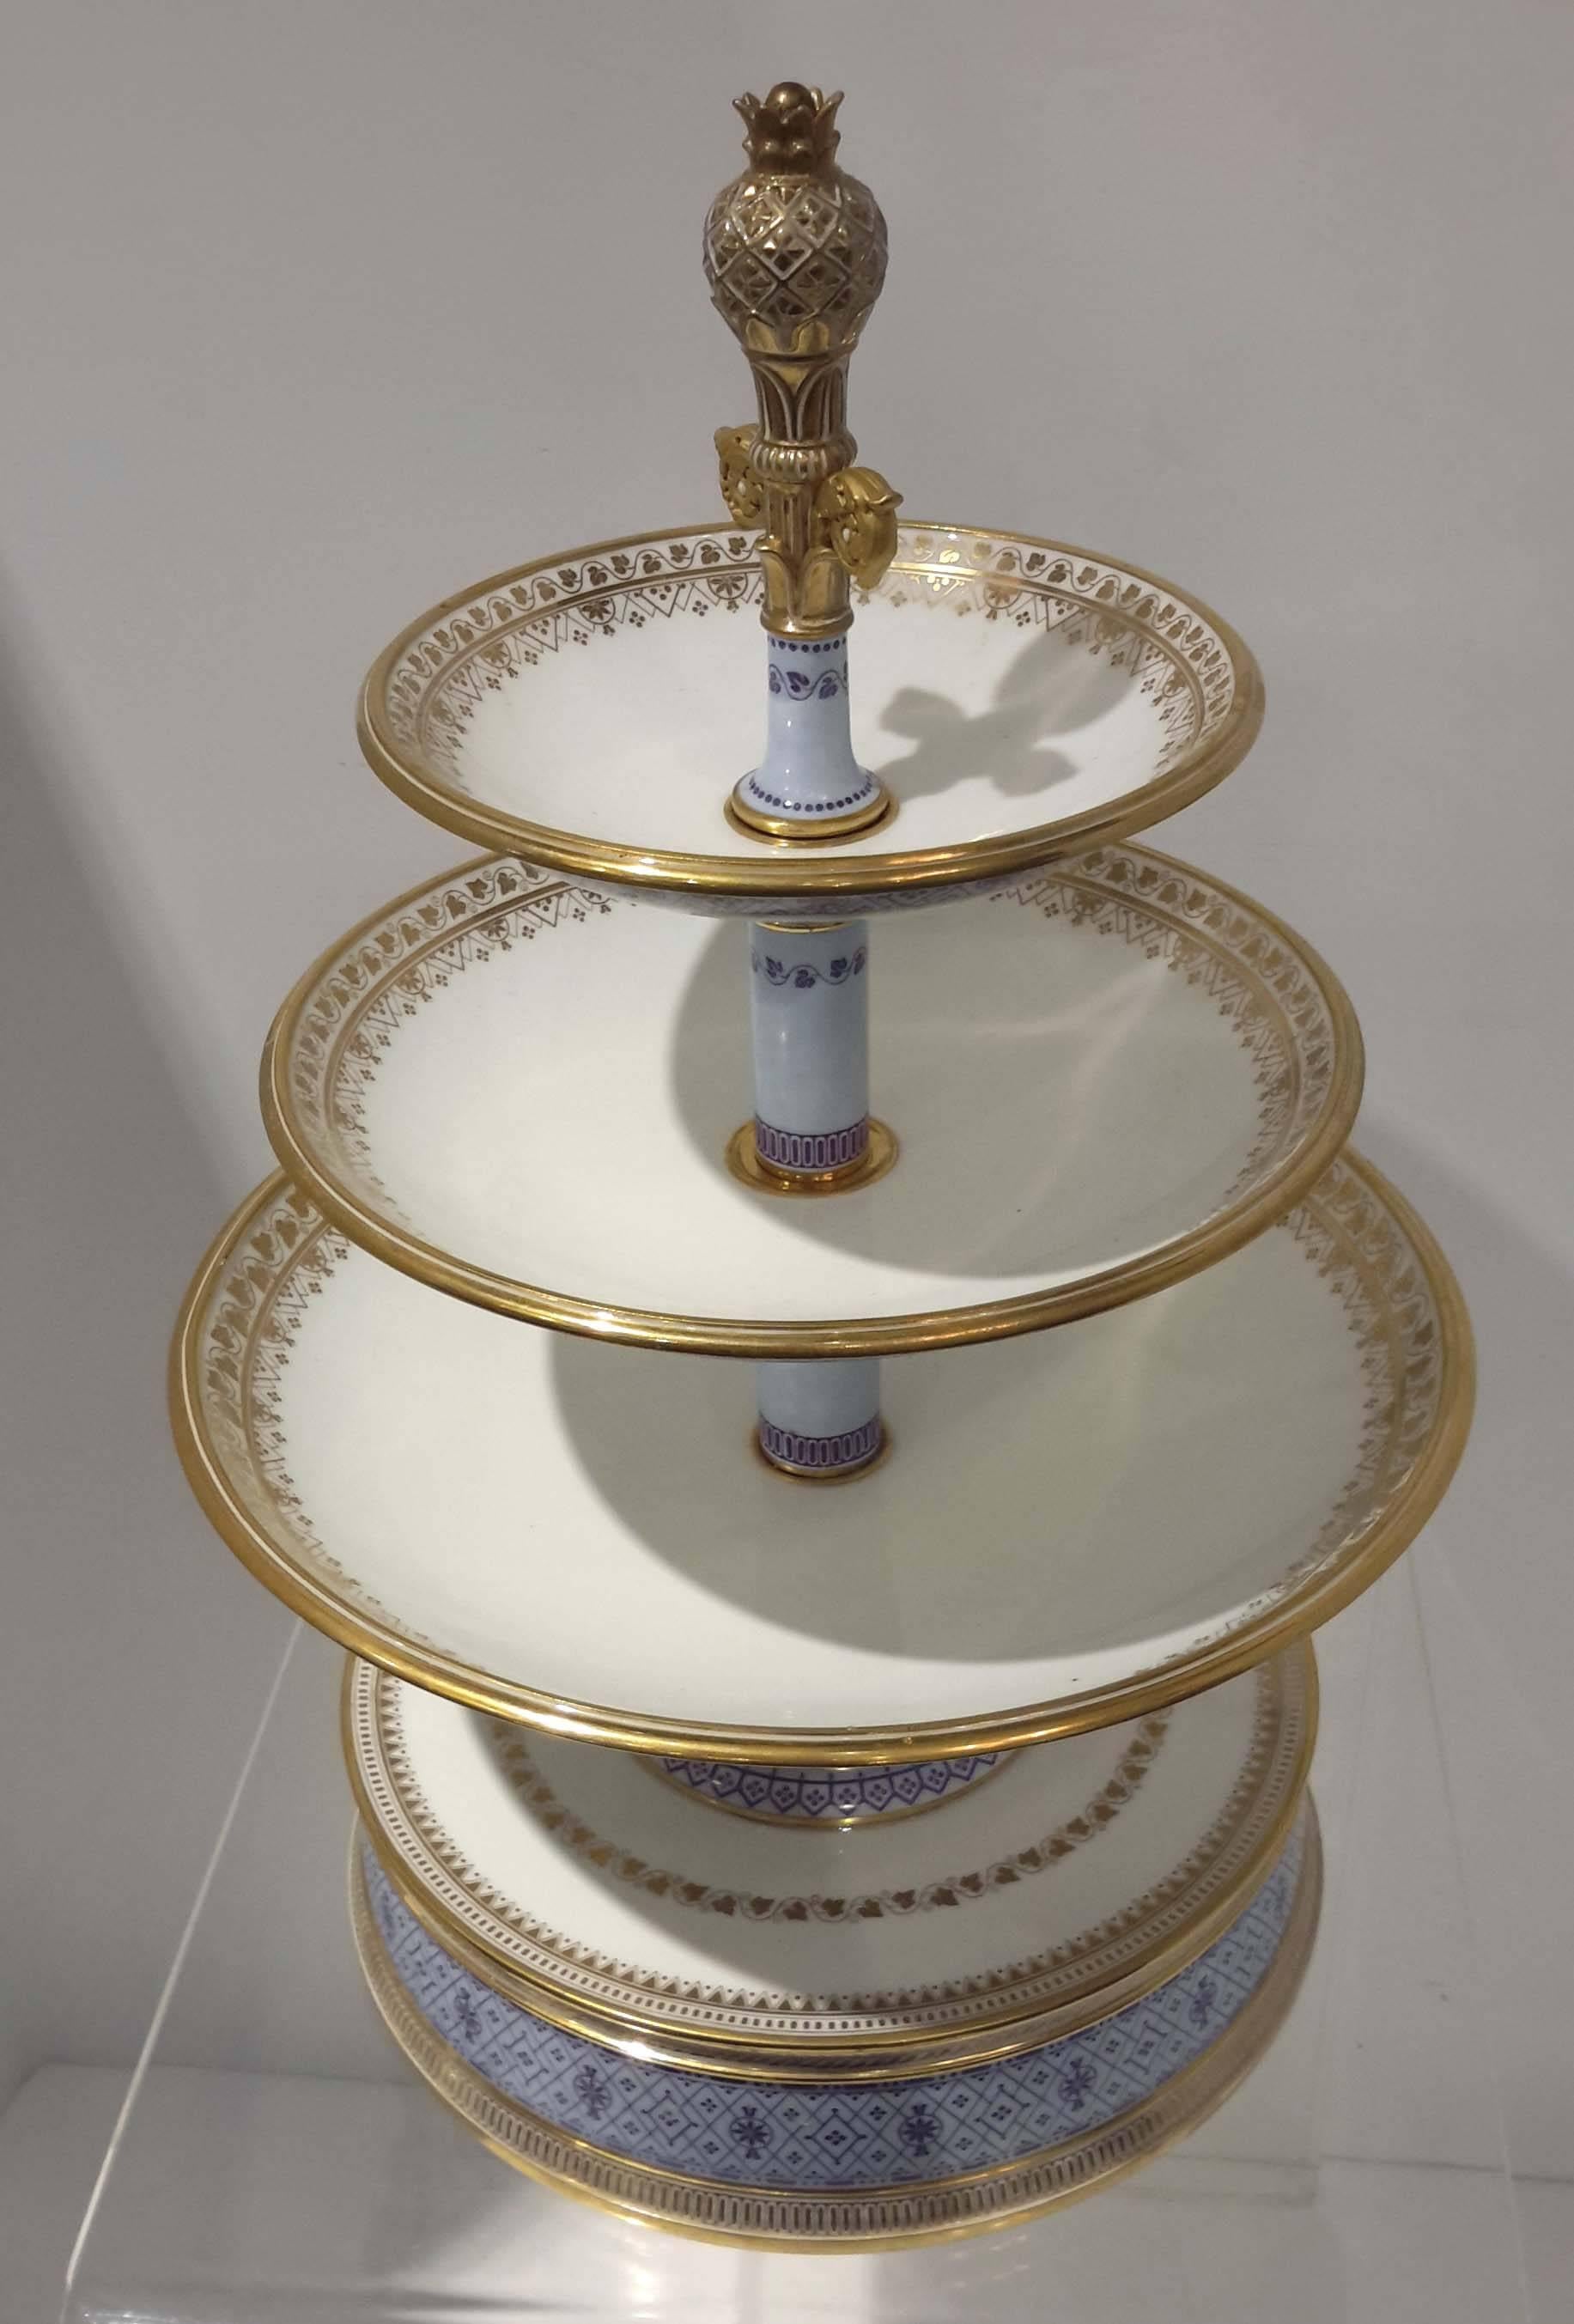 This is a rare Sèvres porcelain centrepiece and is of finest quality of Sèvres.
 